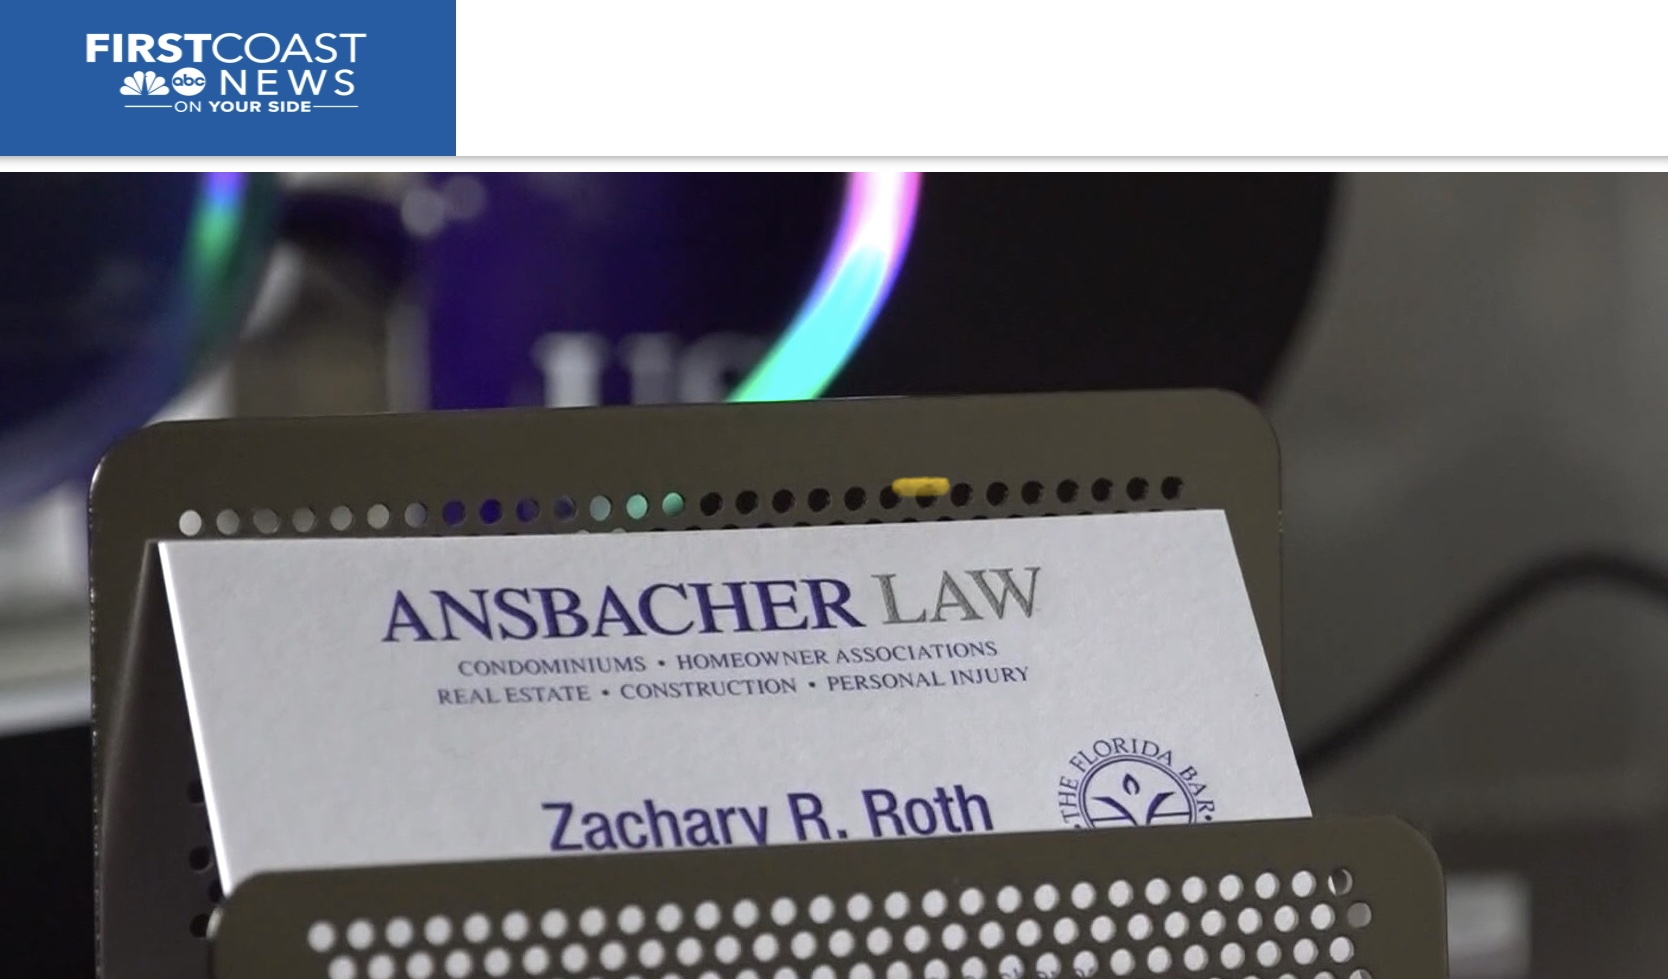 Business card of Zachary Roth from Ansbacher Law displayed in a card holder, with a blurred computer monitor showing the First Coast News logo in the background.